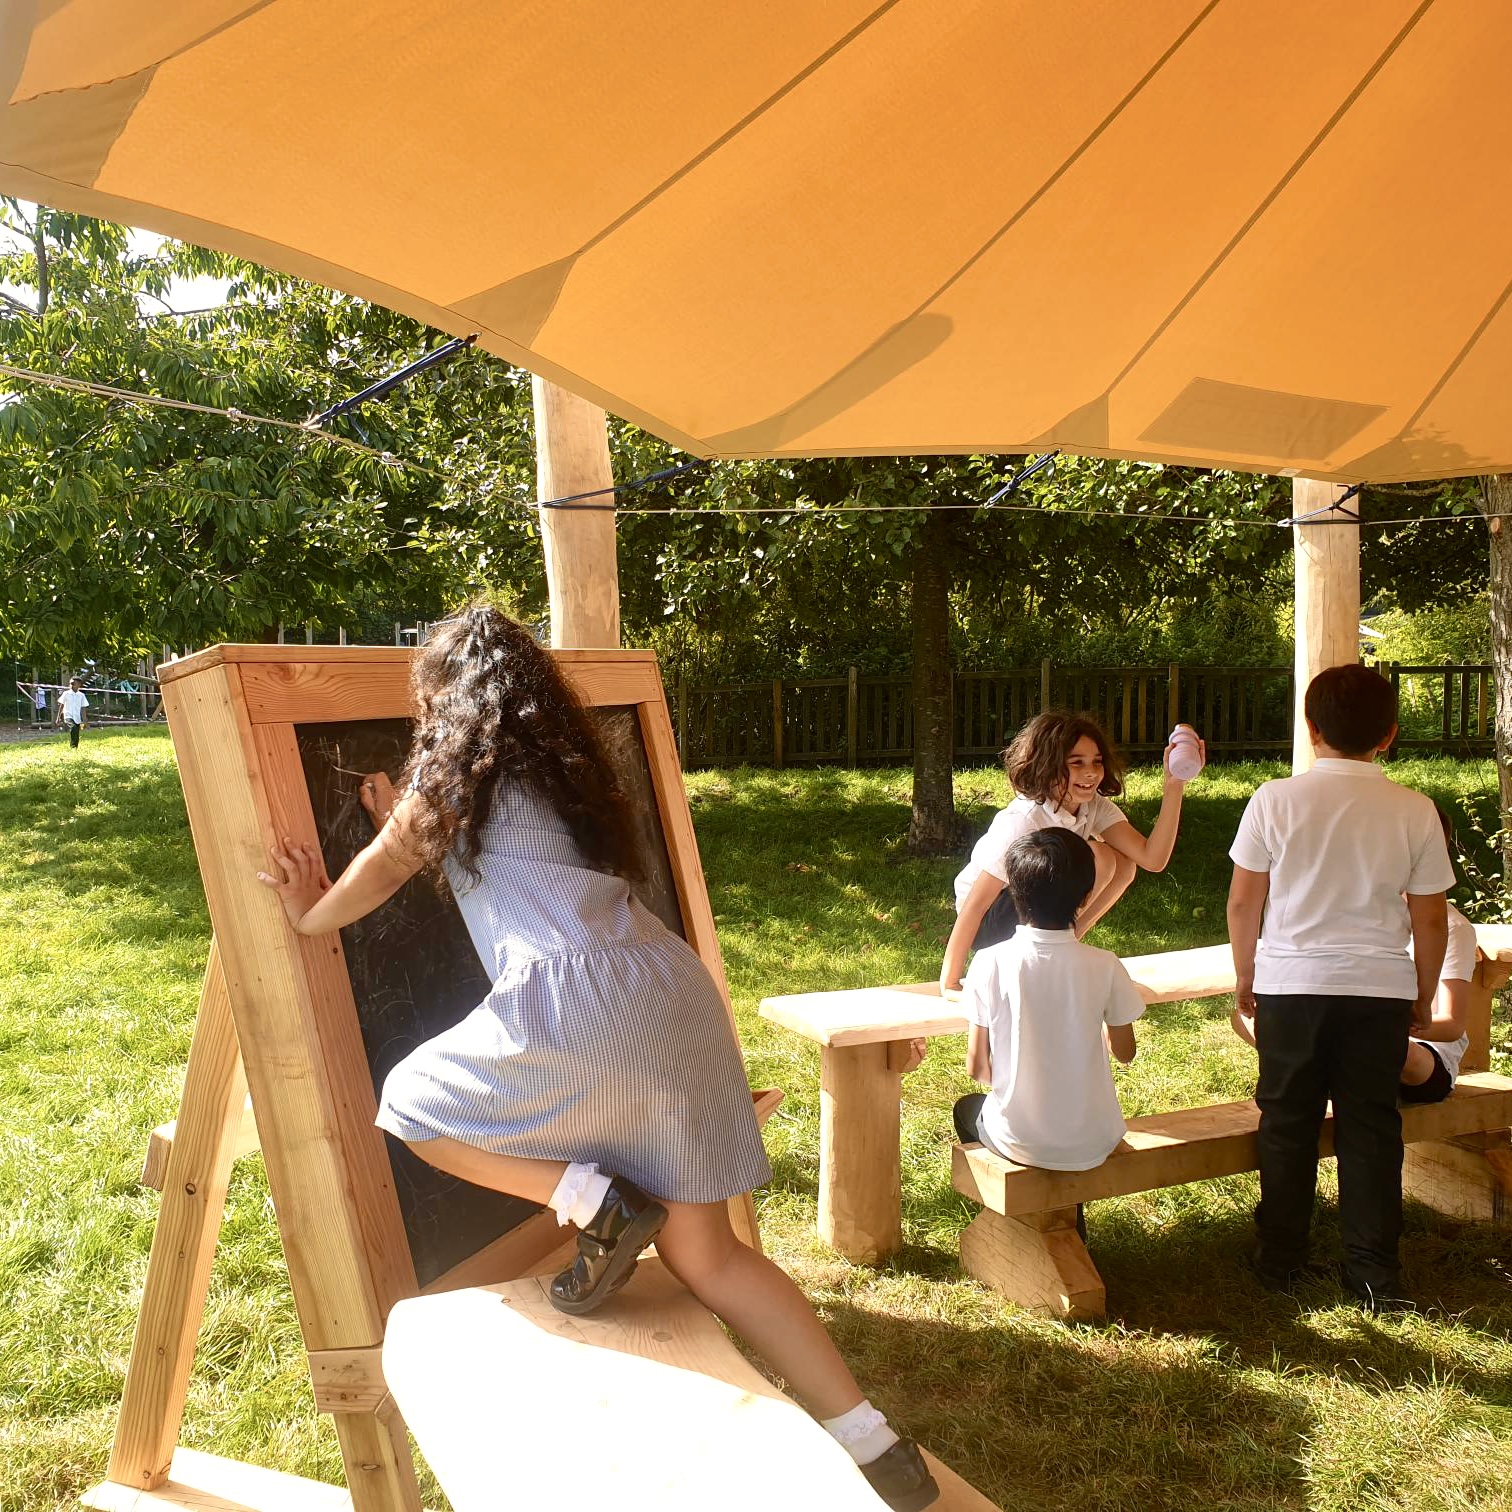 a girl drawing on a board under a canopy of an outdoor classroom.